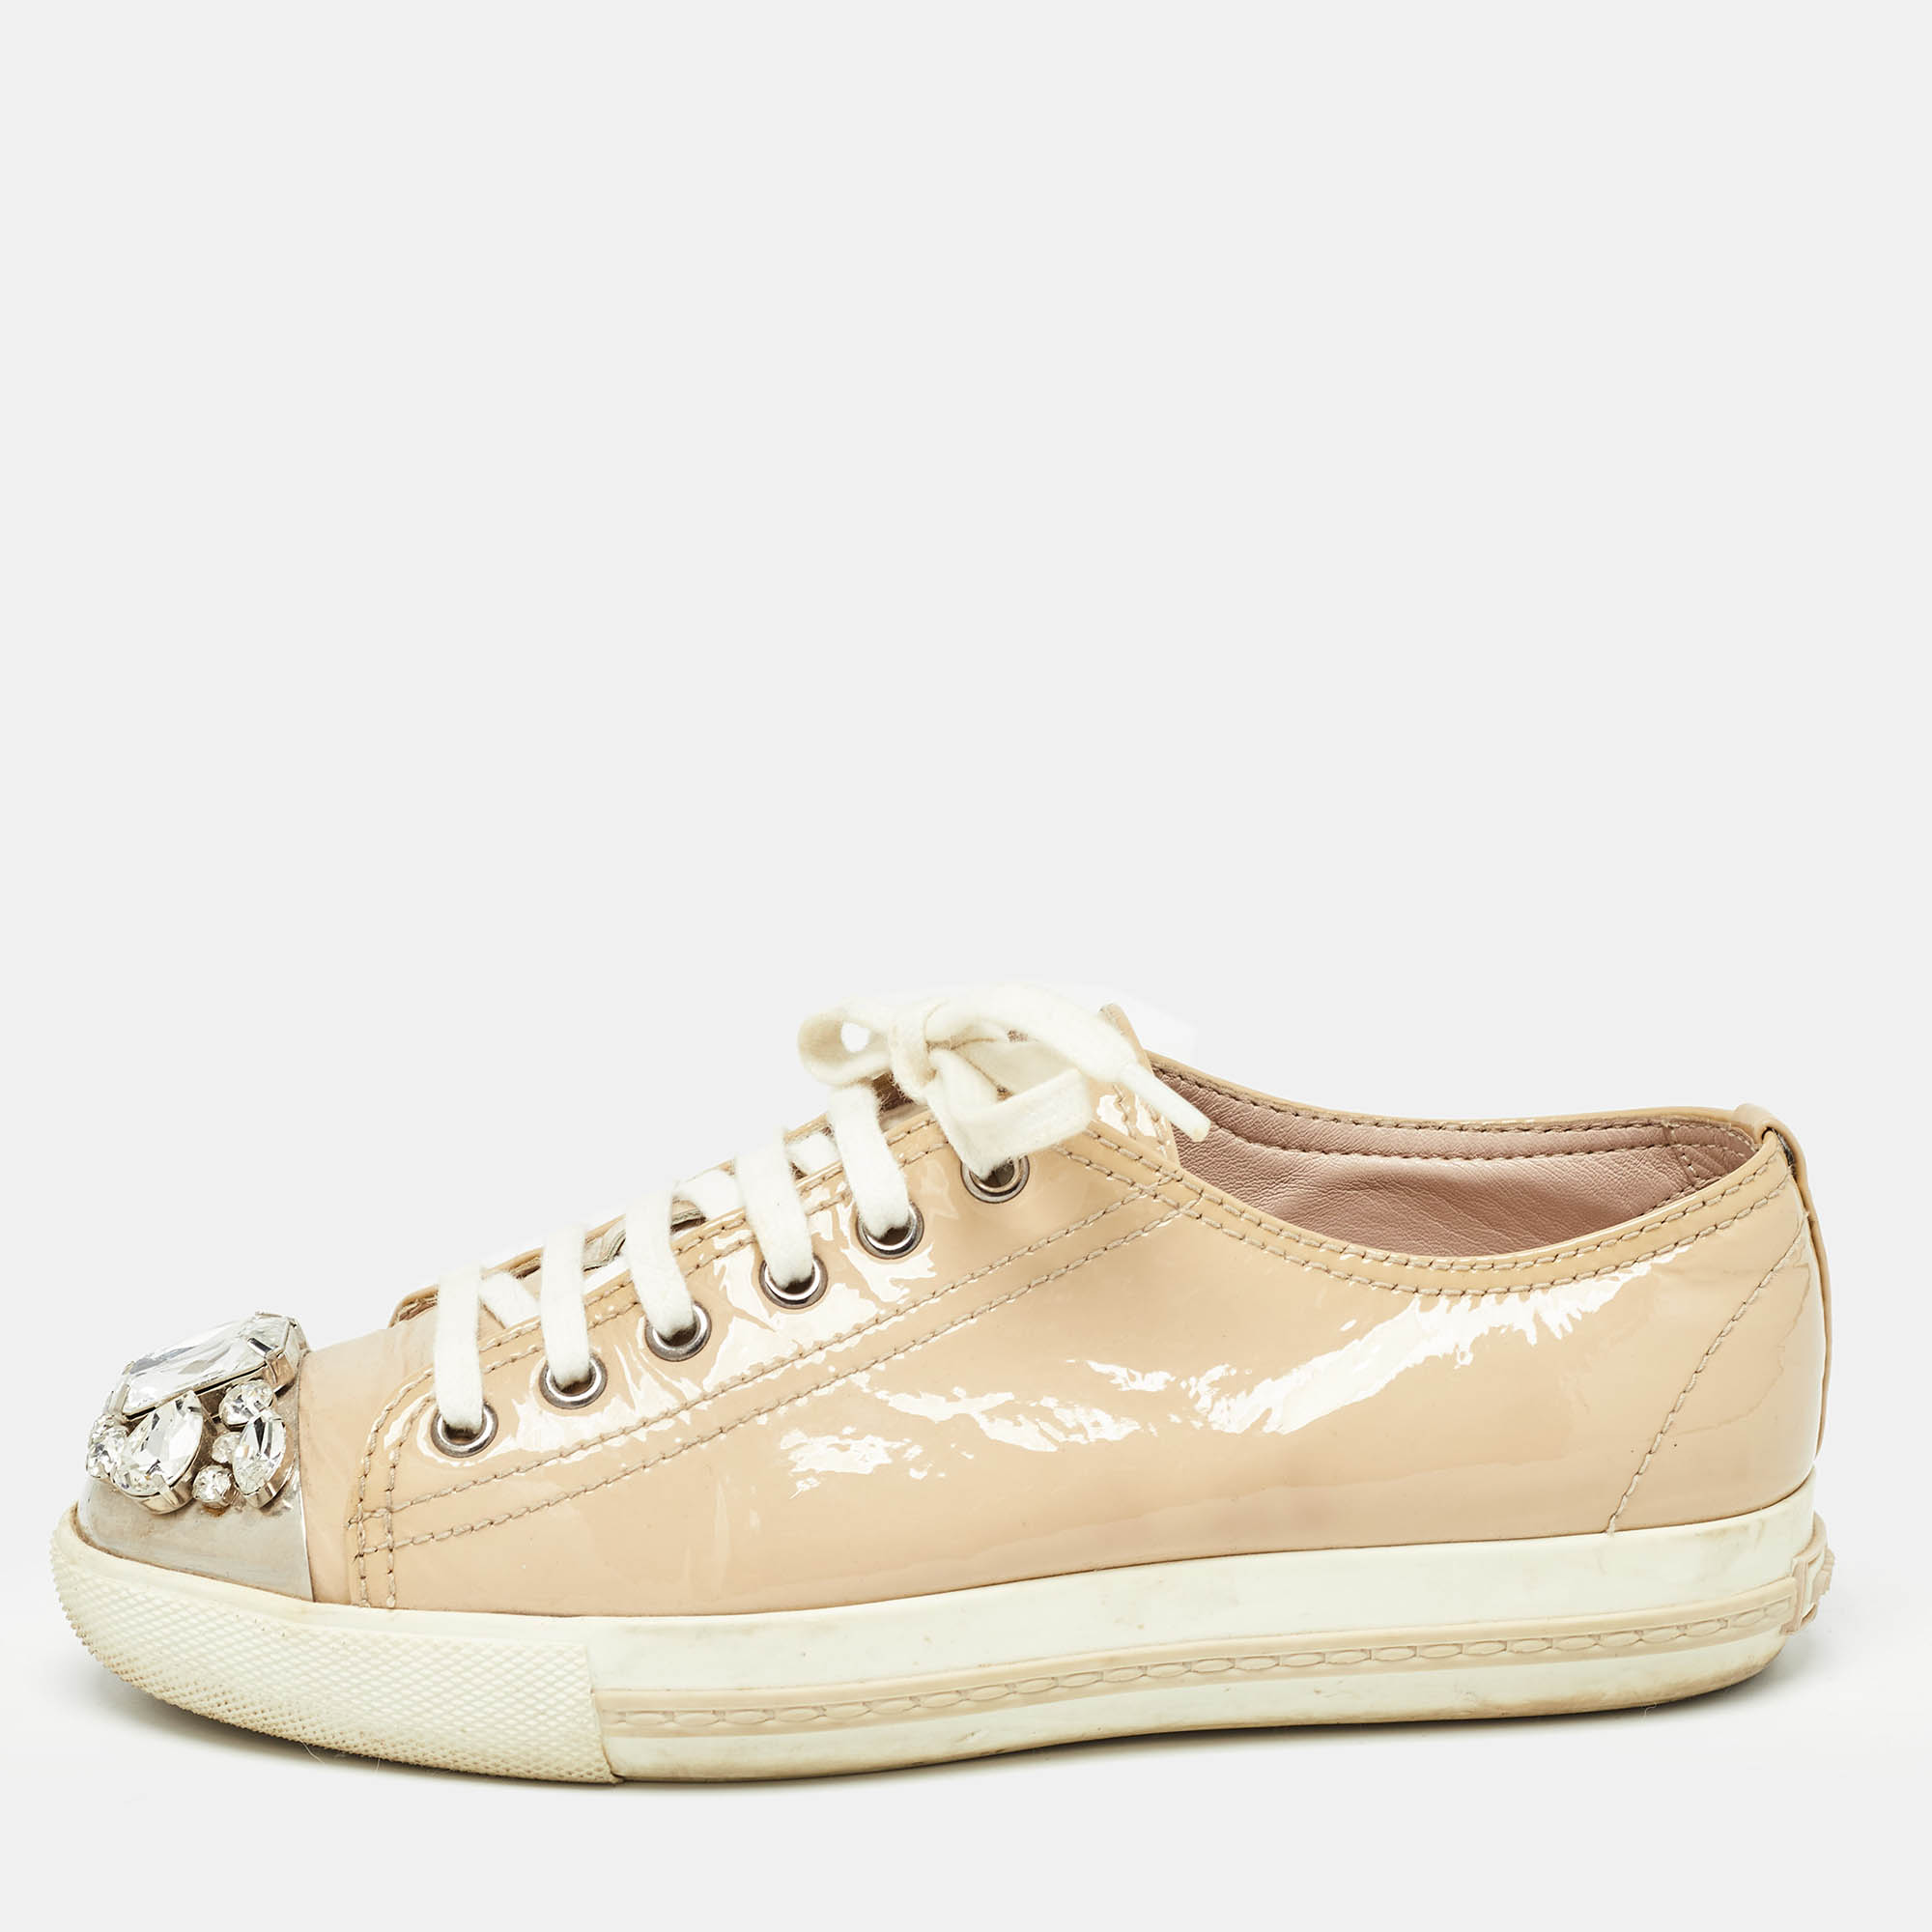 

Miu Miu Beige Patent Leather Crystal Embellished Lace Up Sneakers Size